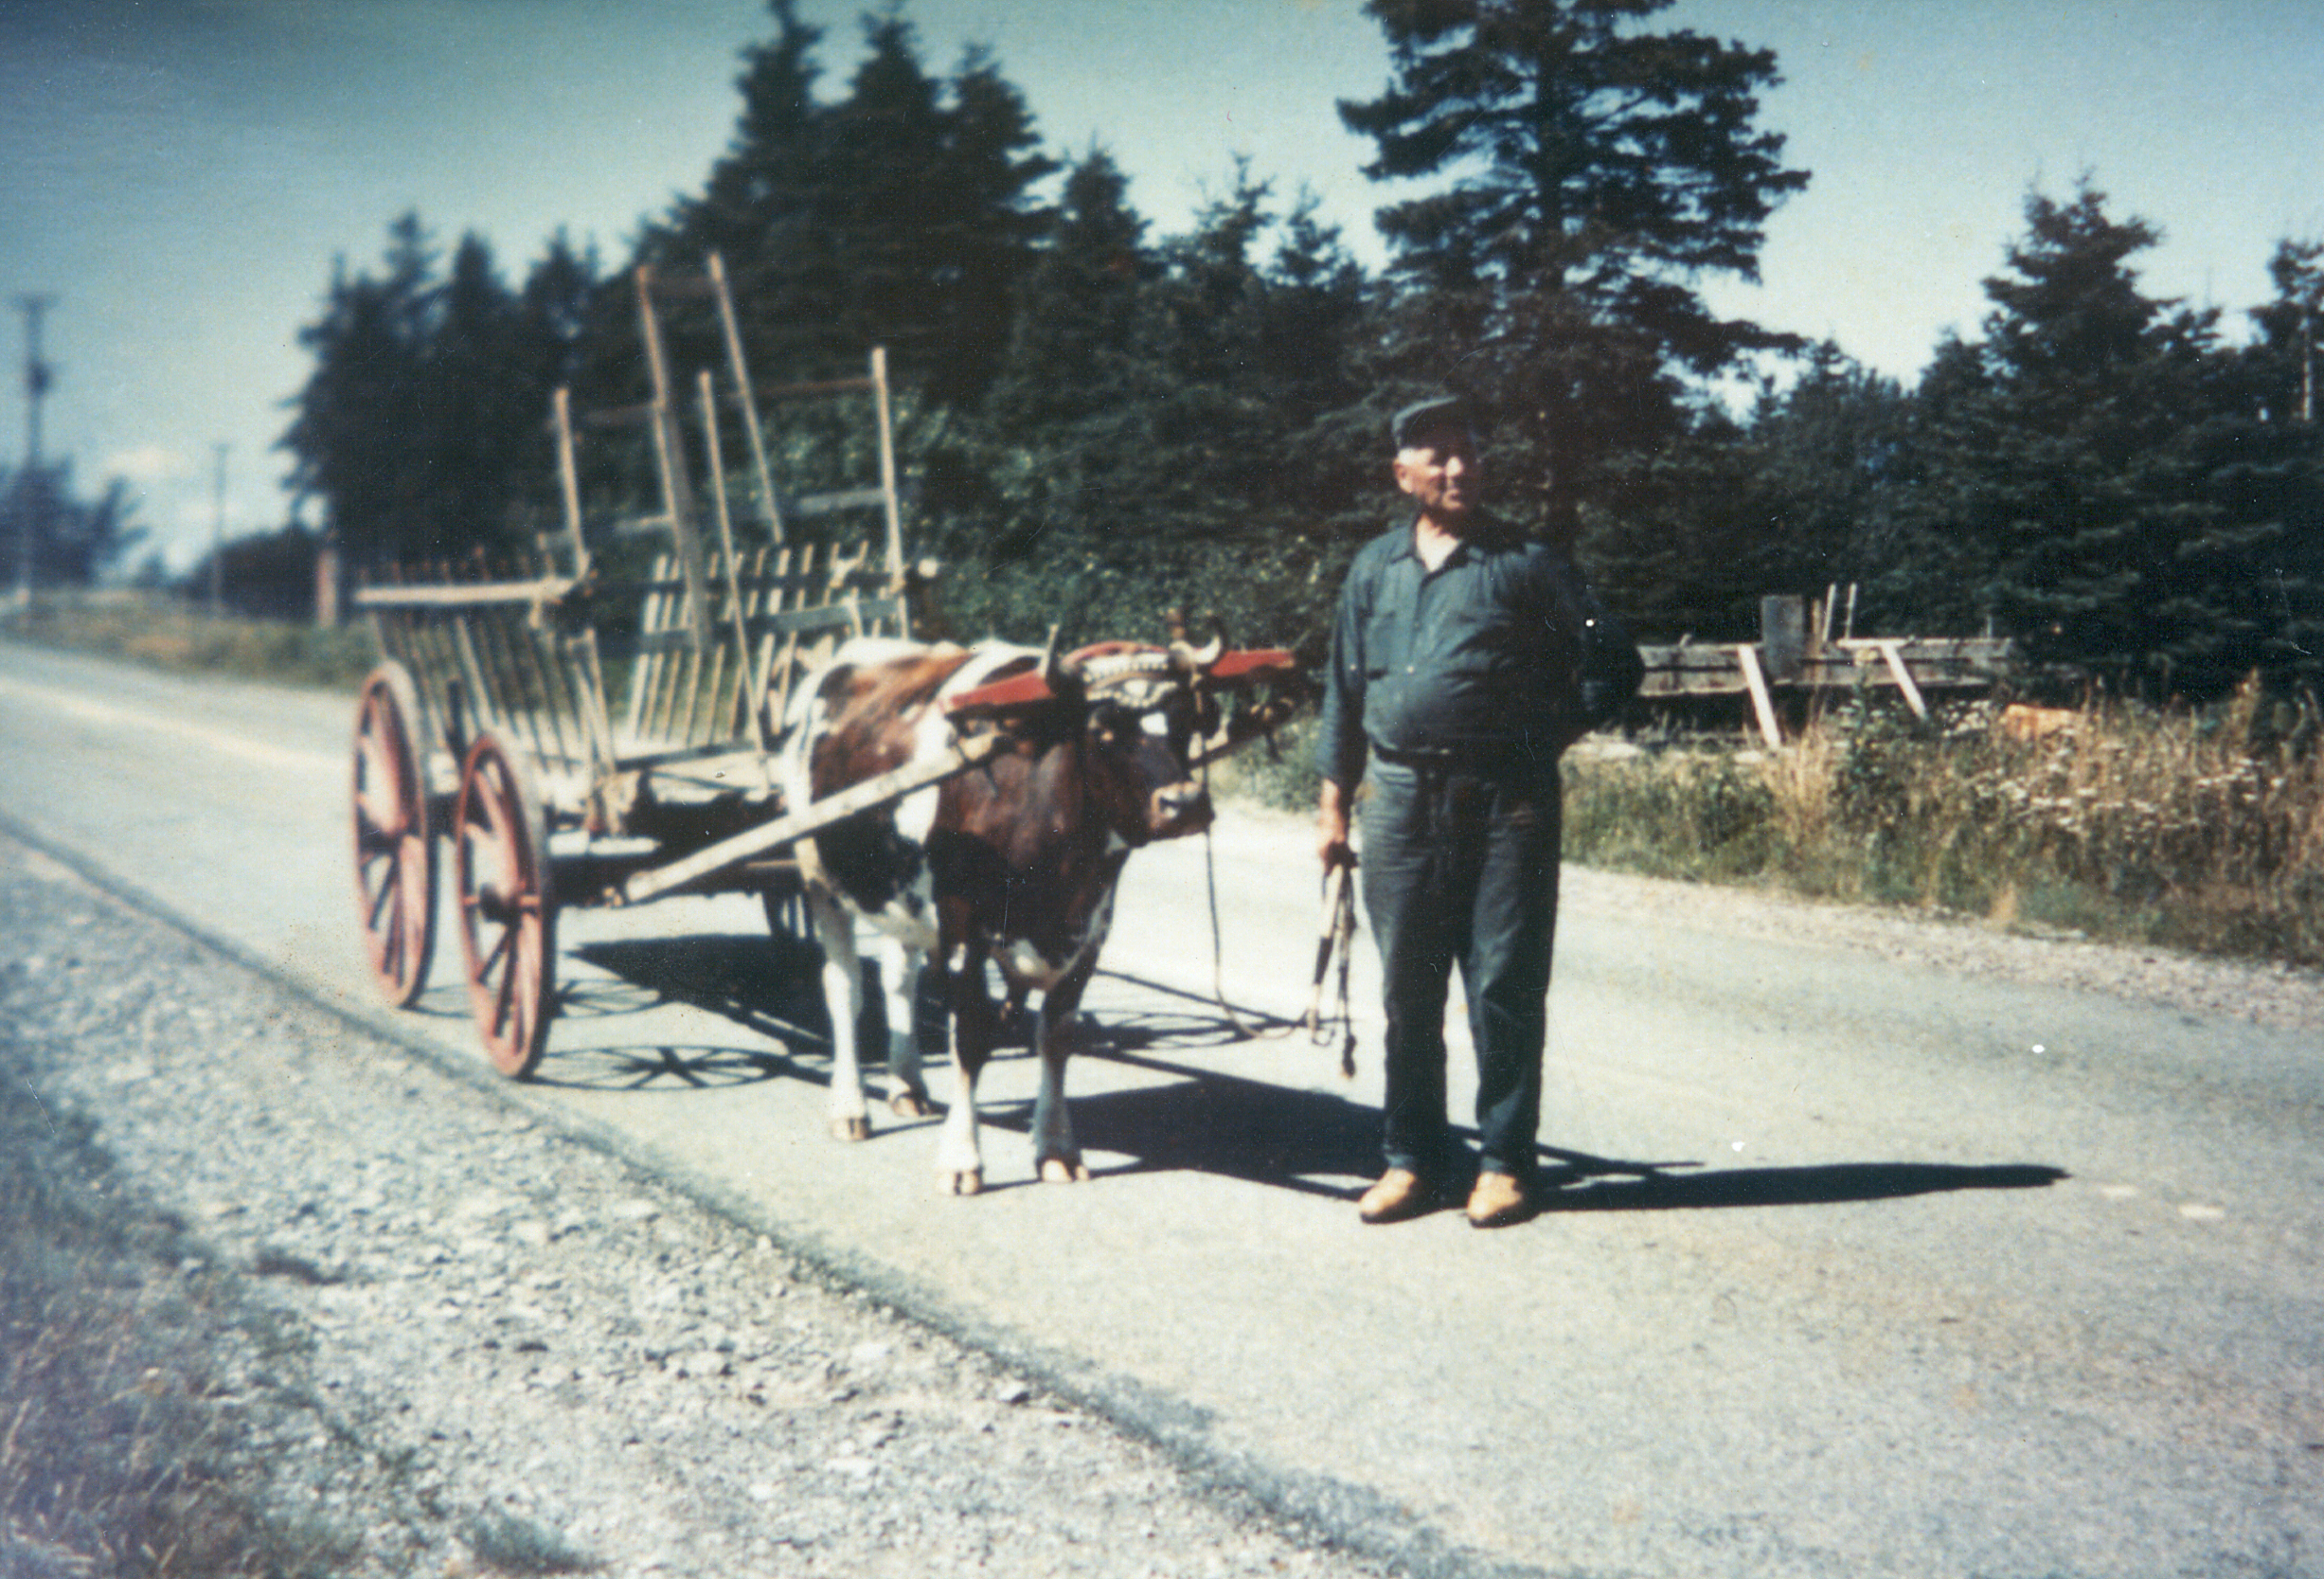 John LaPierre with an ox on a road